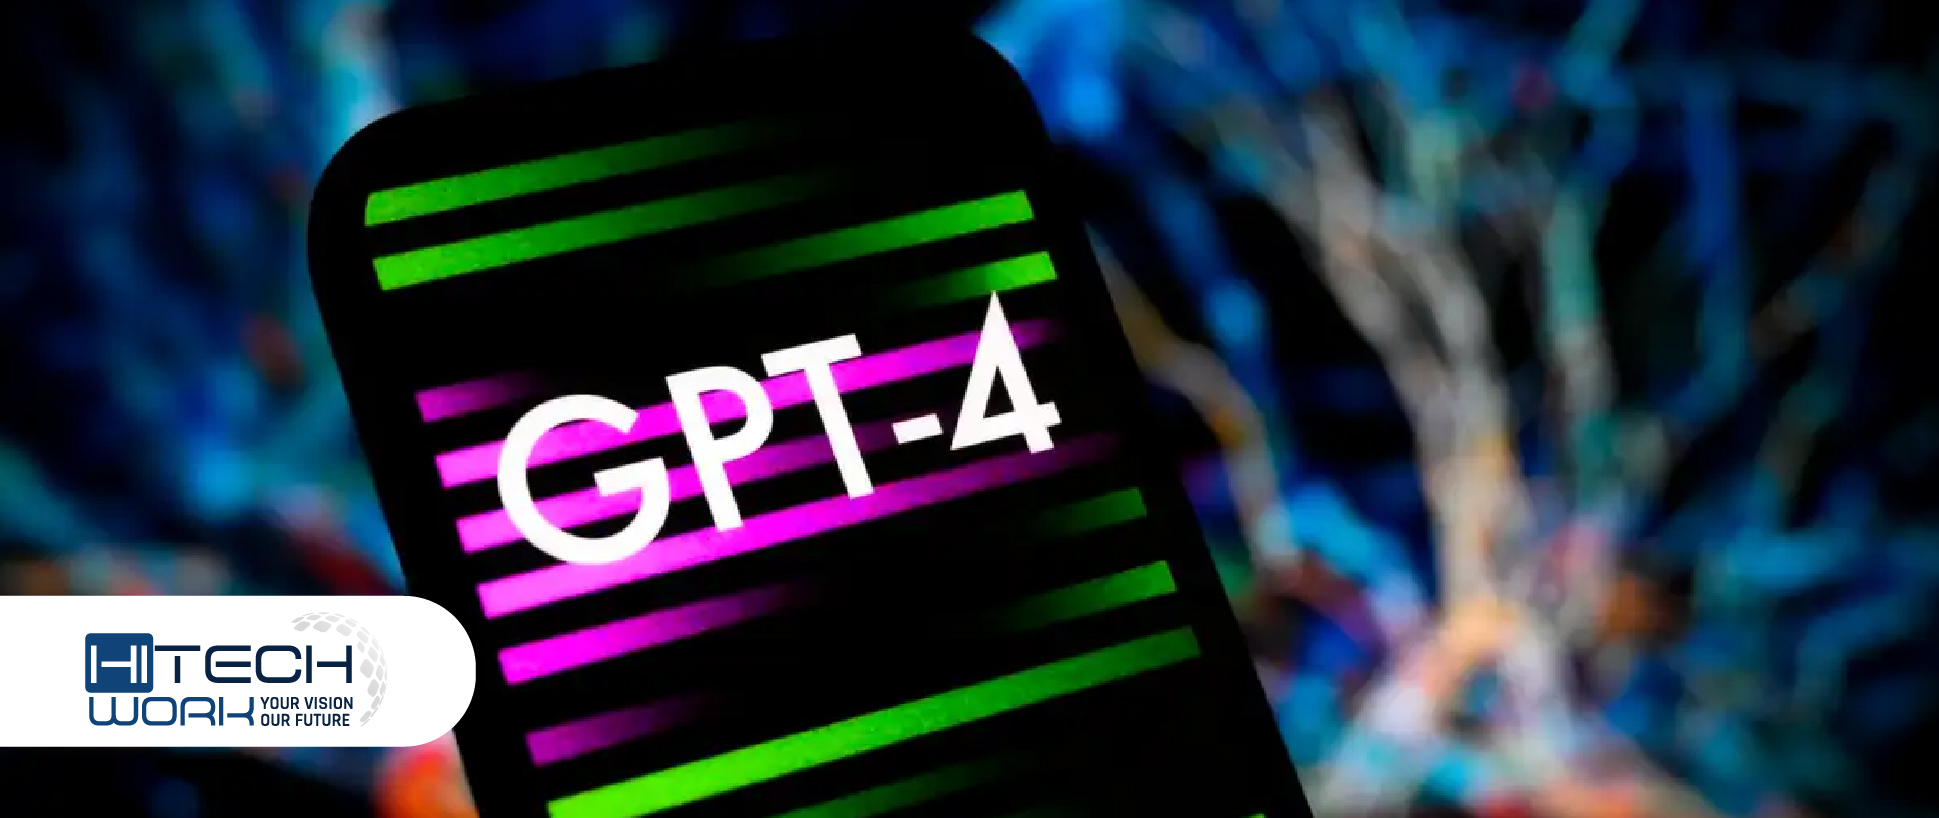 Microsoft Researchers Claim GPT-4 Is Display Sparks